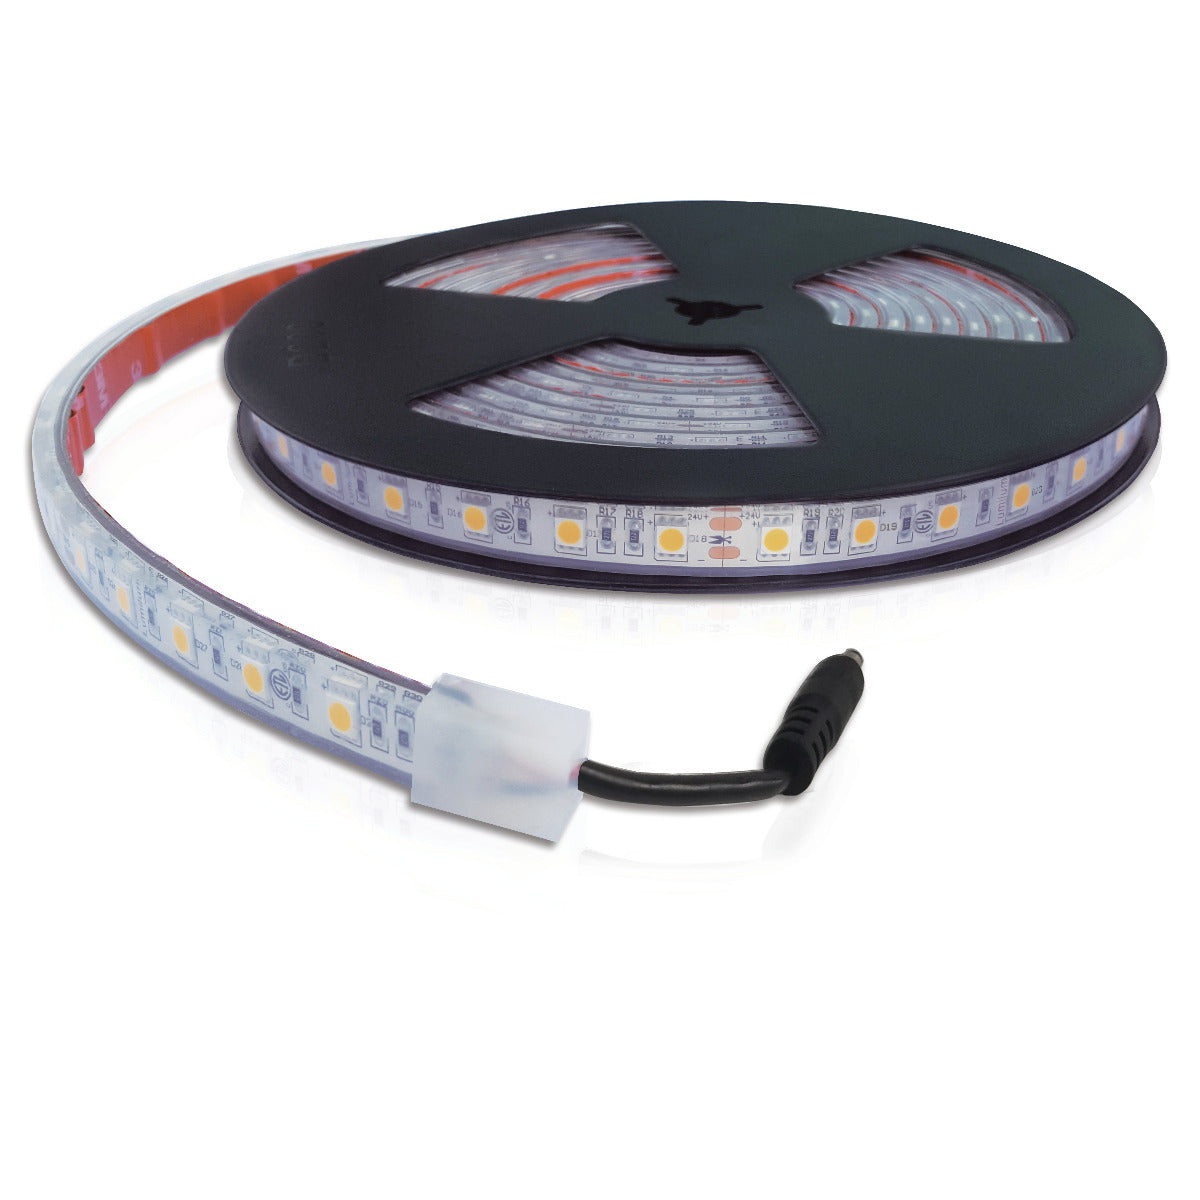 Load image into Gallery viewer, ip67 silicone encased led strip light with visible yellow chips loosely coiled on black reel with red and black connector end
